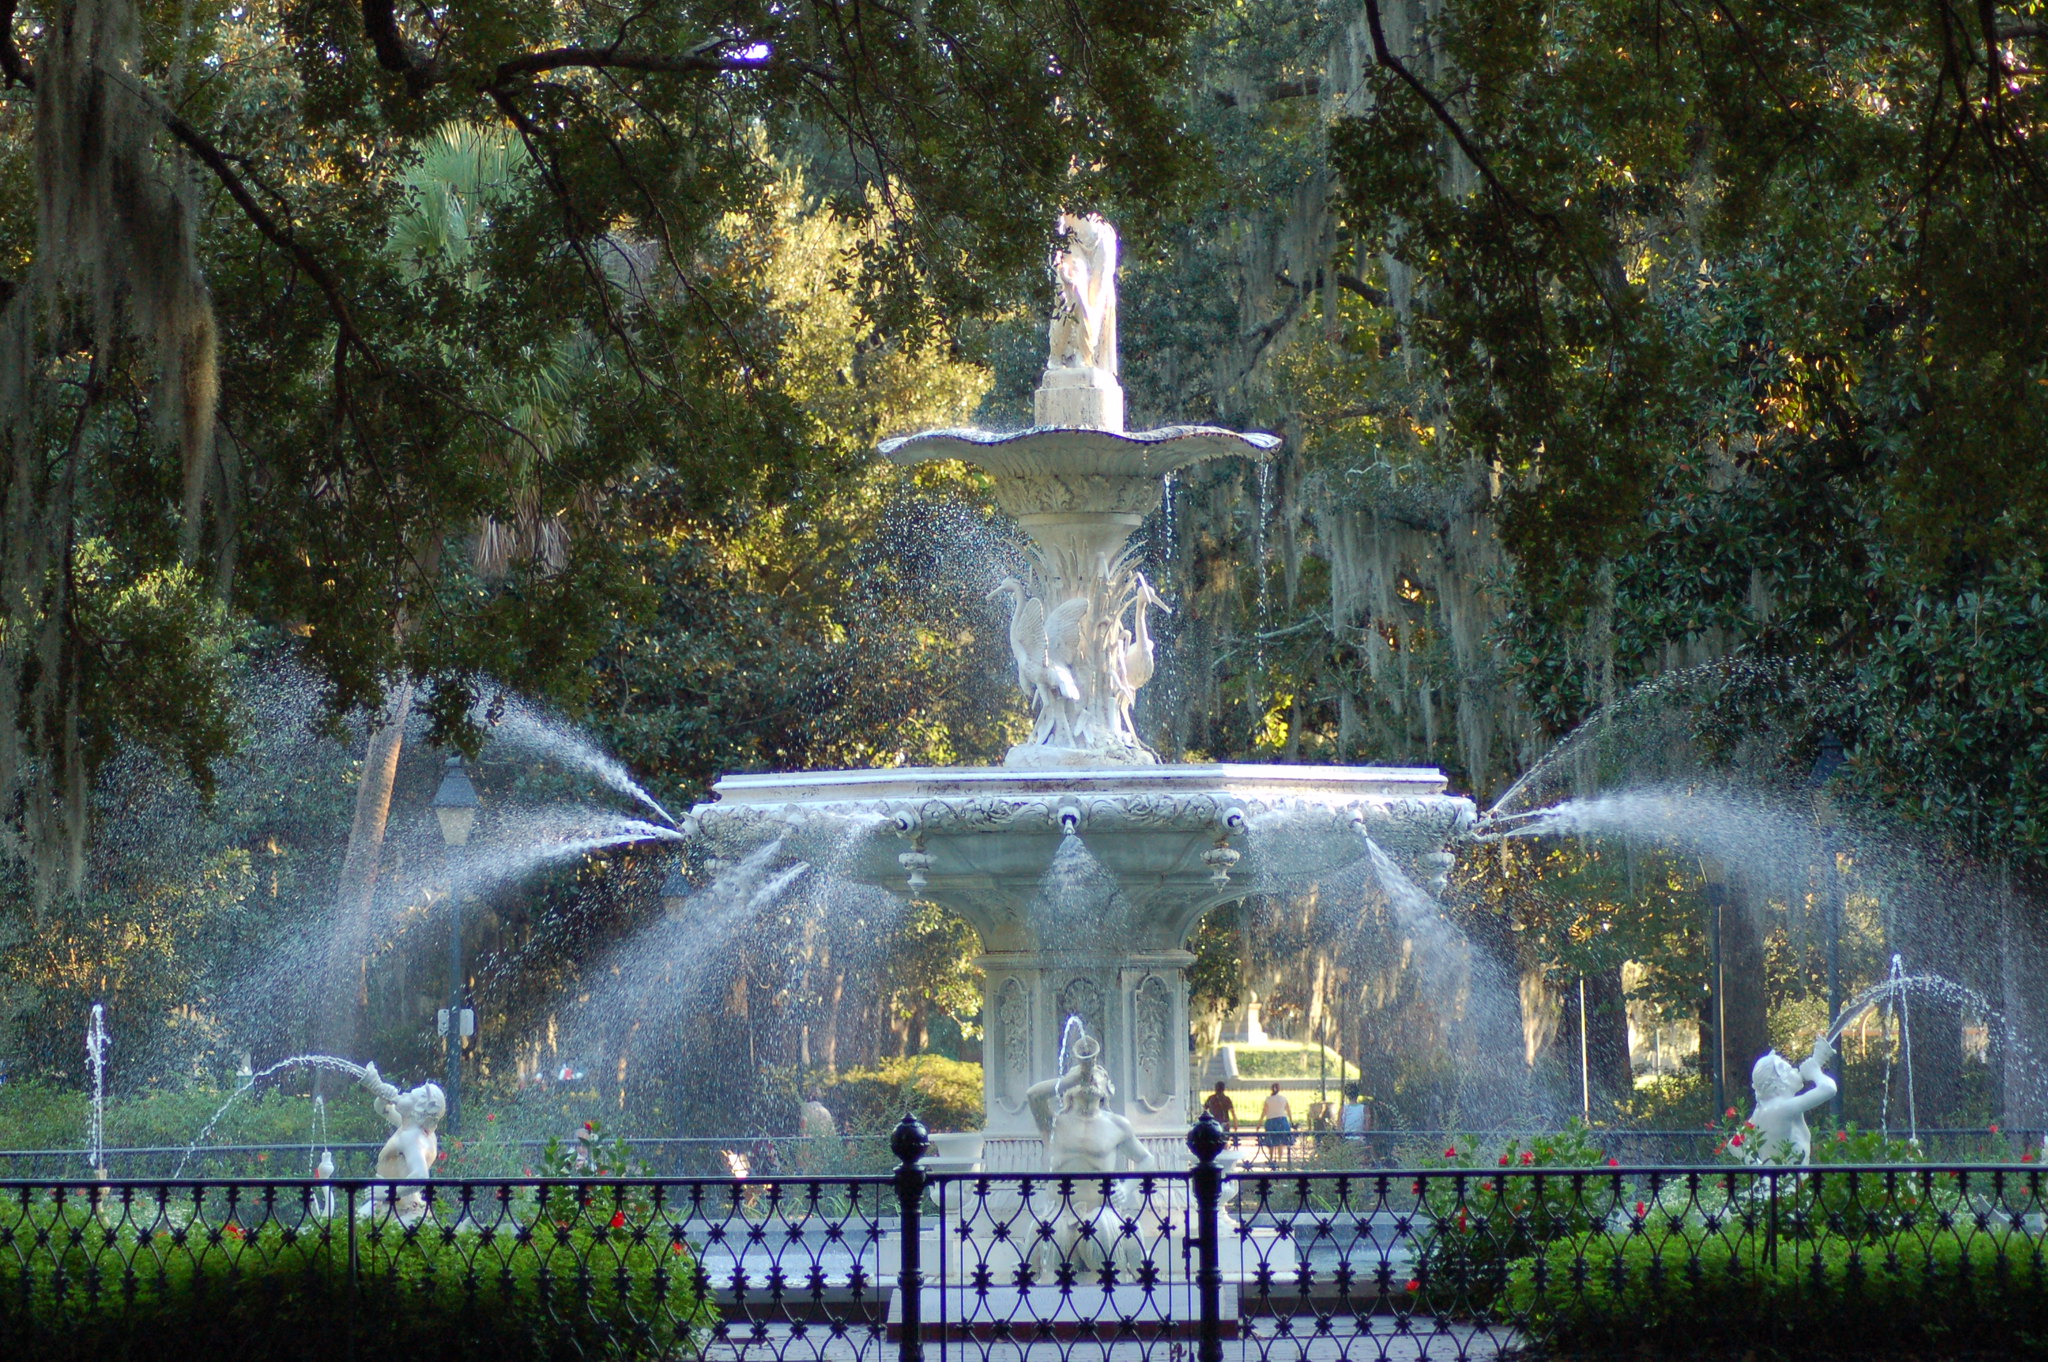 10 Best Things To Do in Savannah, Georgia [with Suggested Tours]